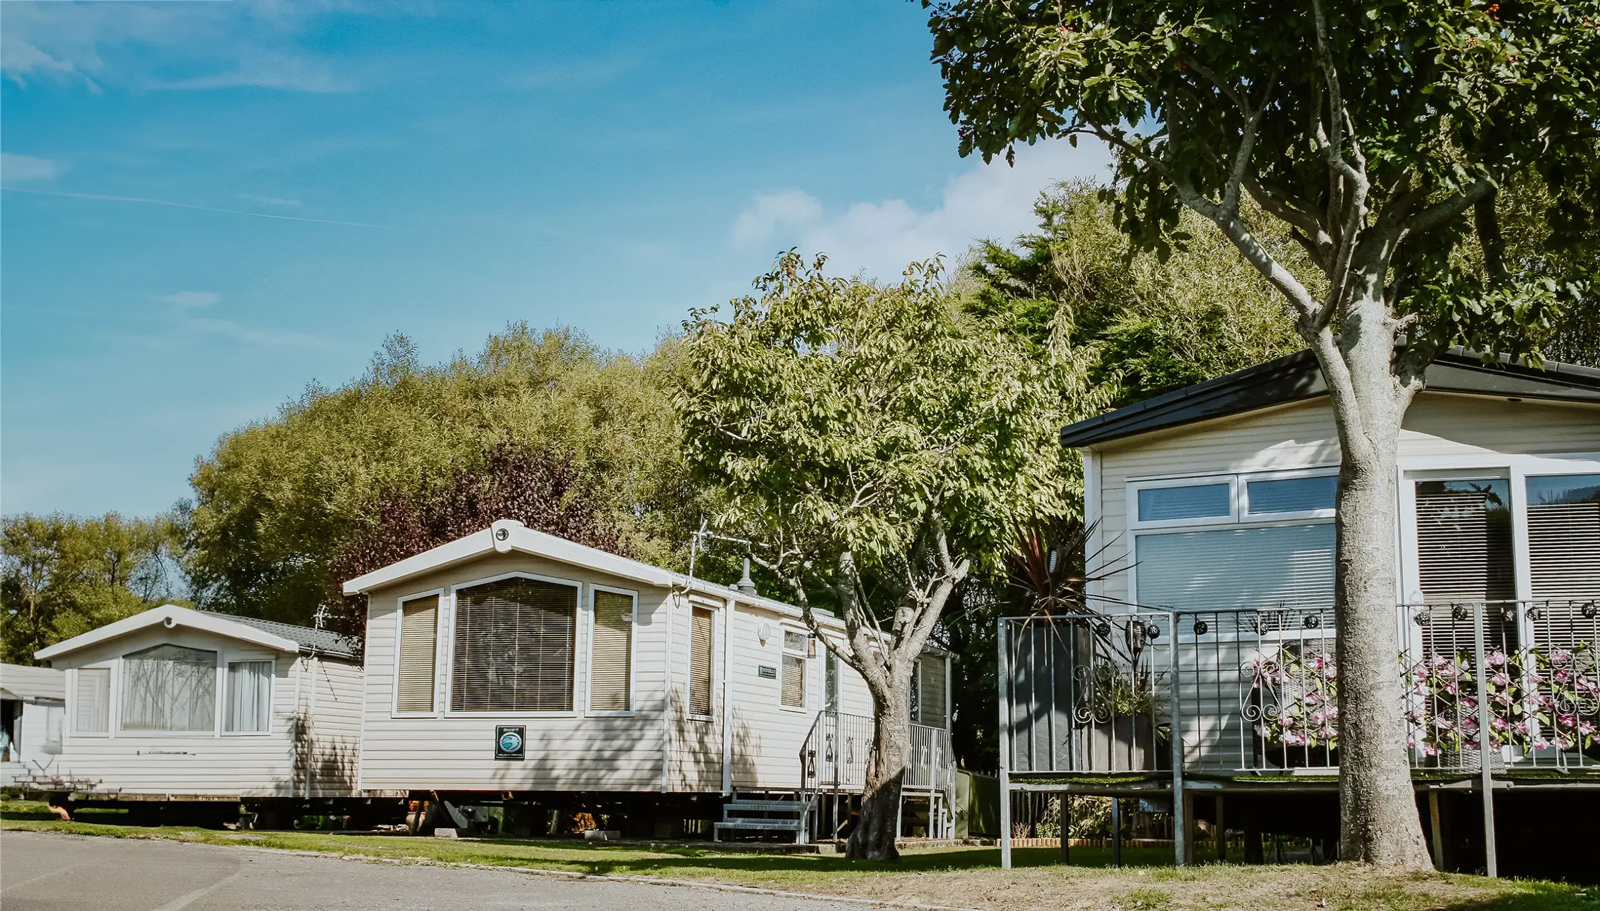 Static holiday homes at Country View Holiday Park in Weston Super Mare